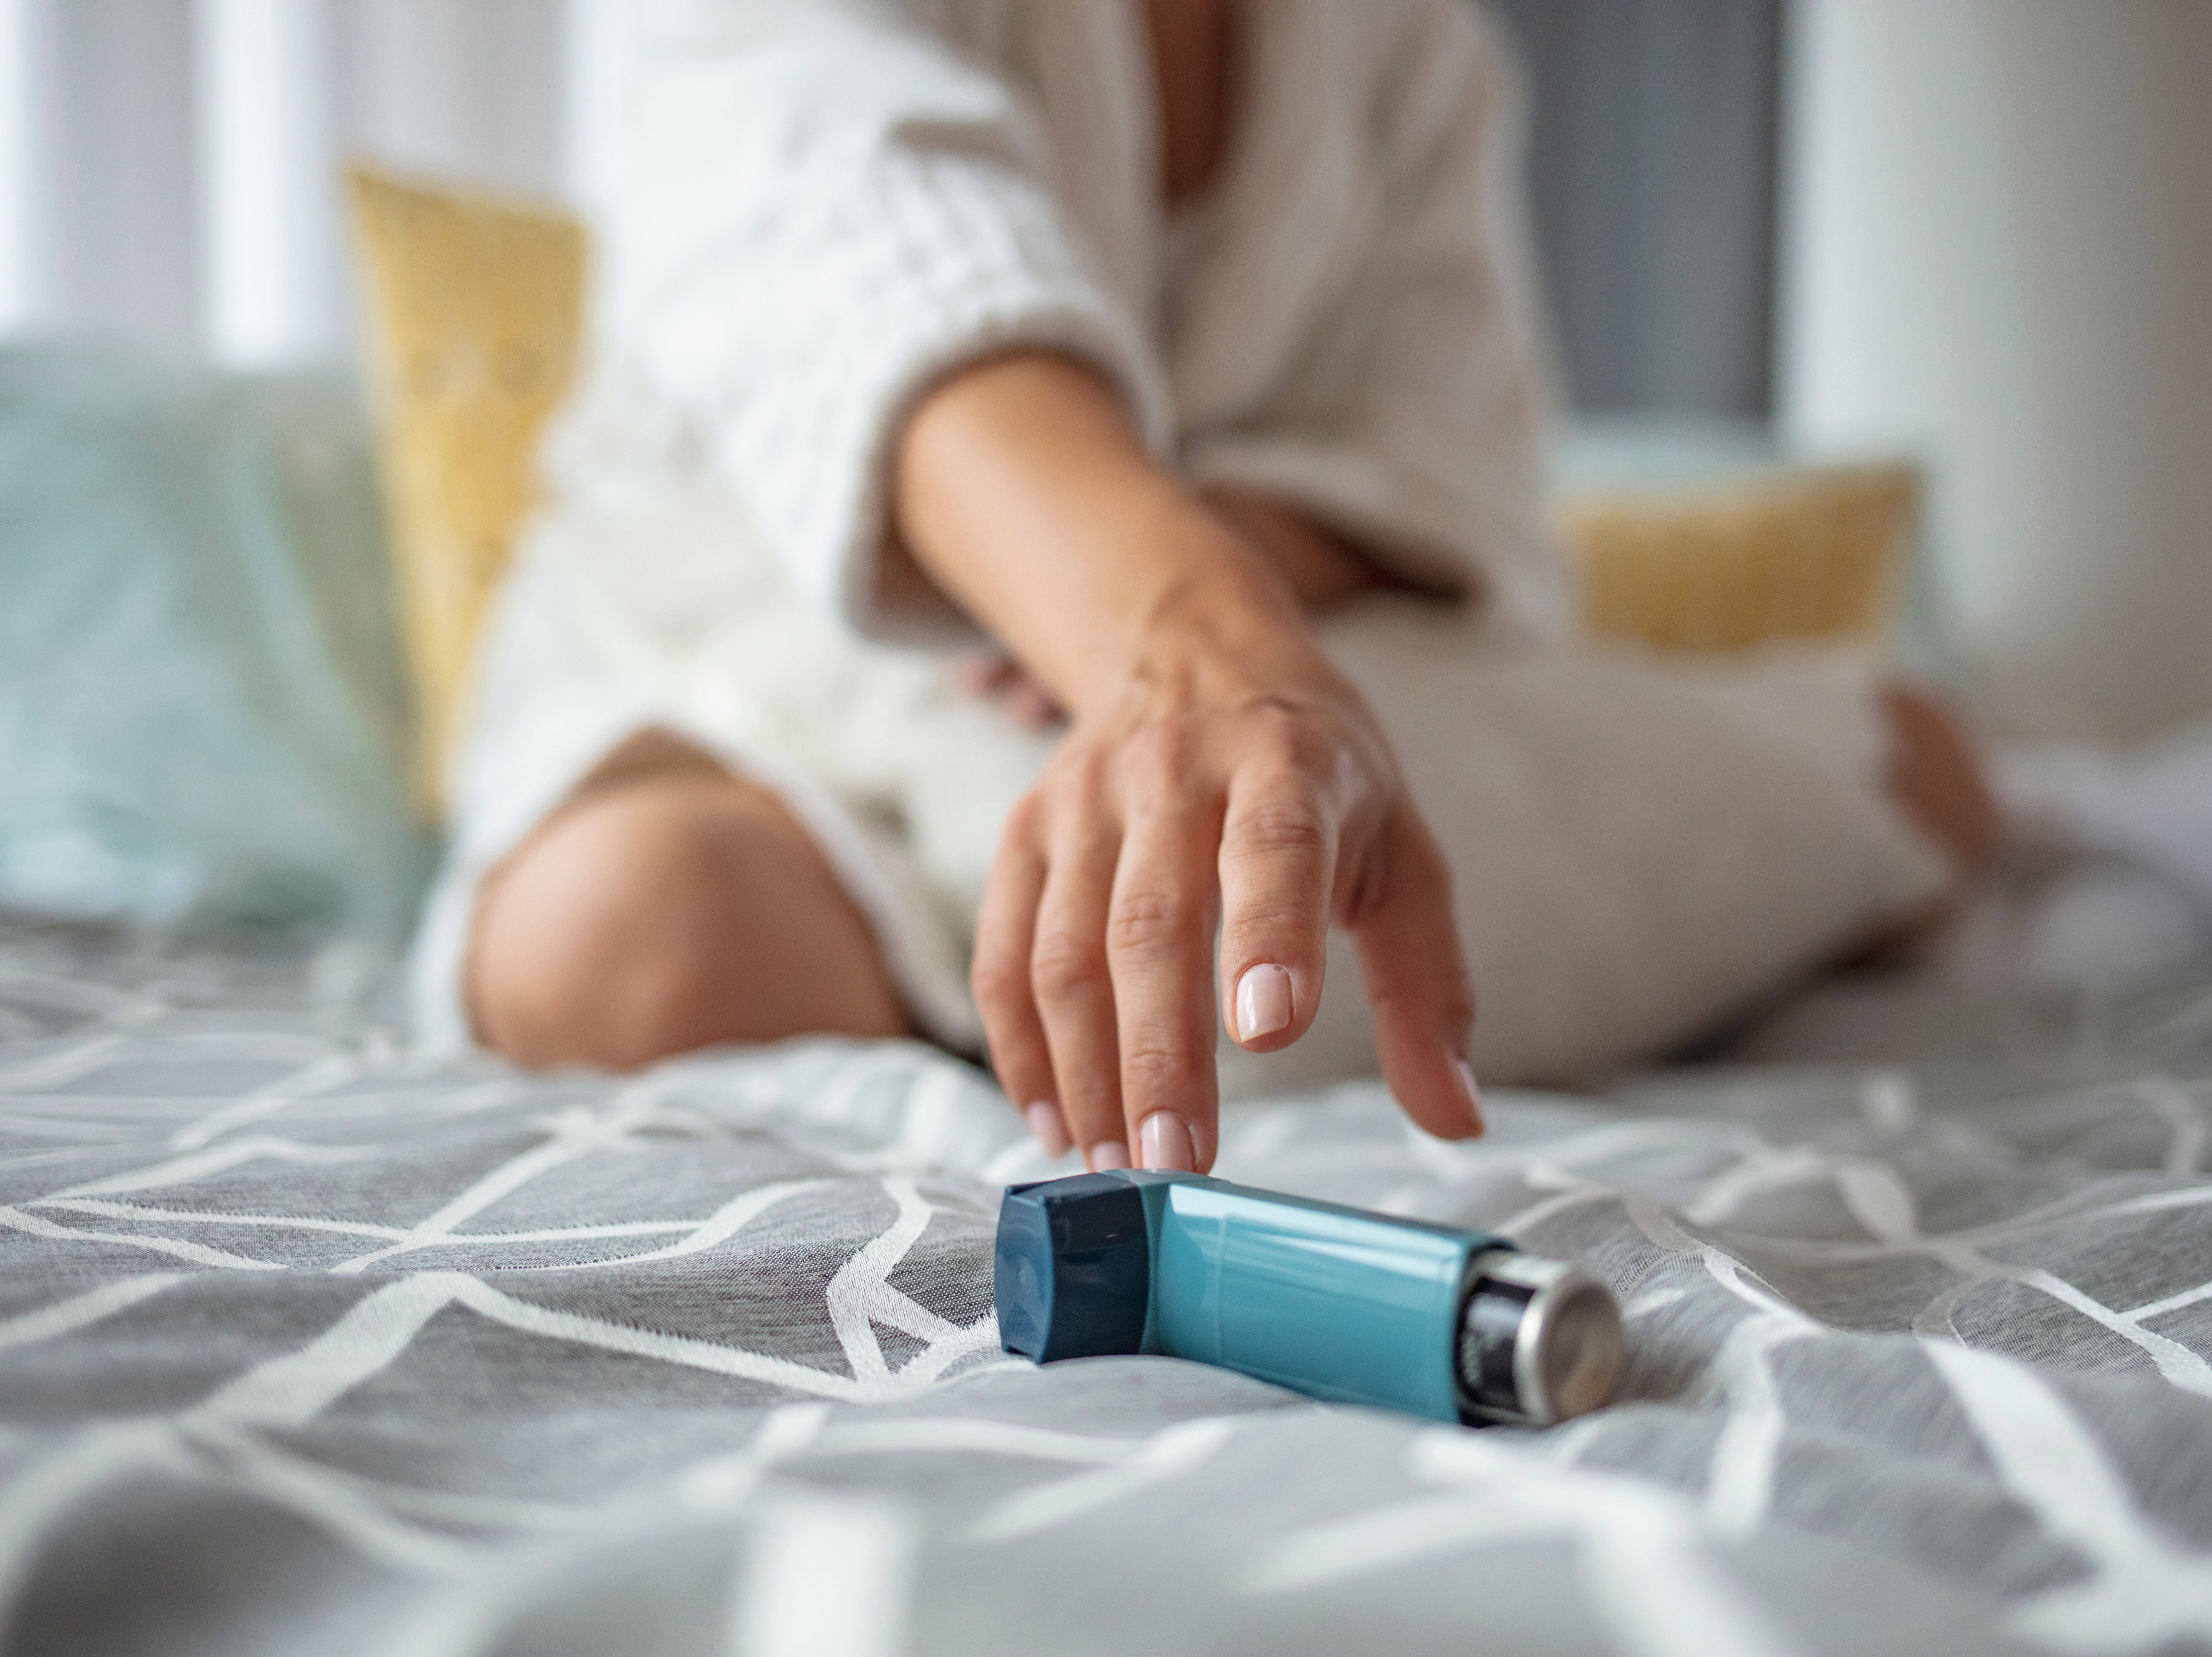 Asthma inhalers help prevent breathlessness and chest tightness as well as severe asthma attacks